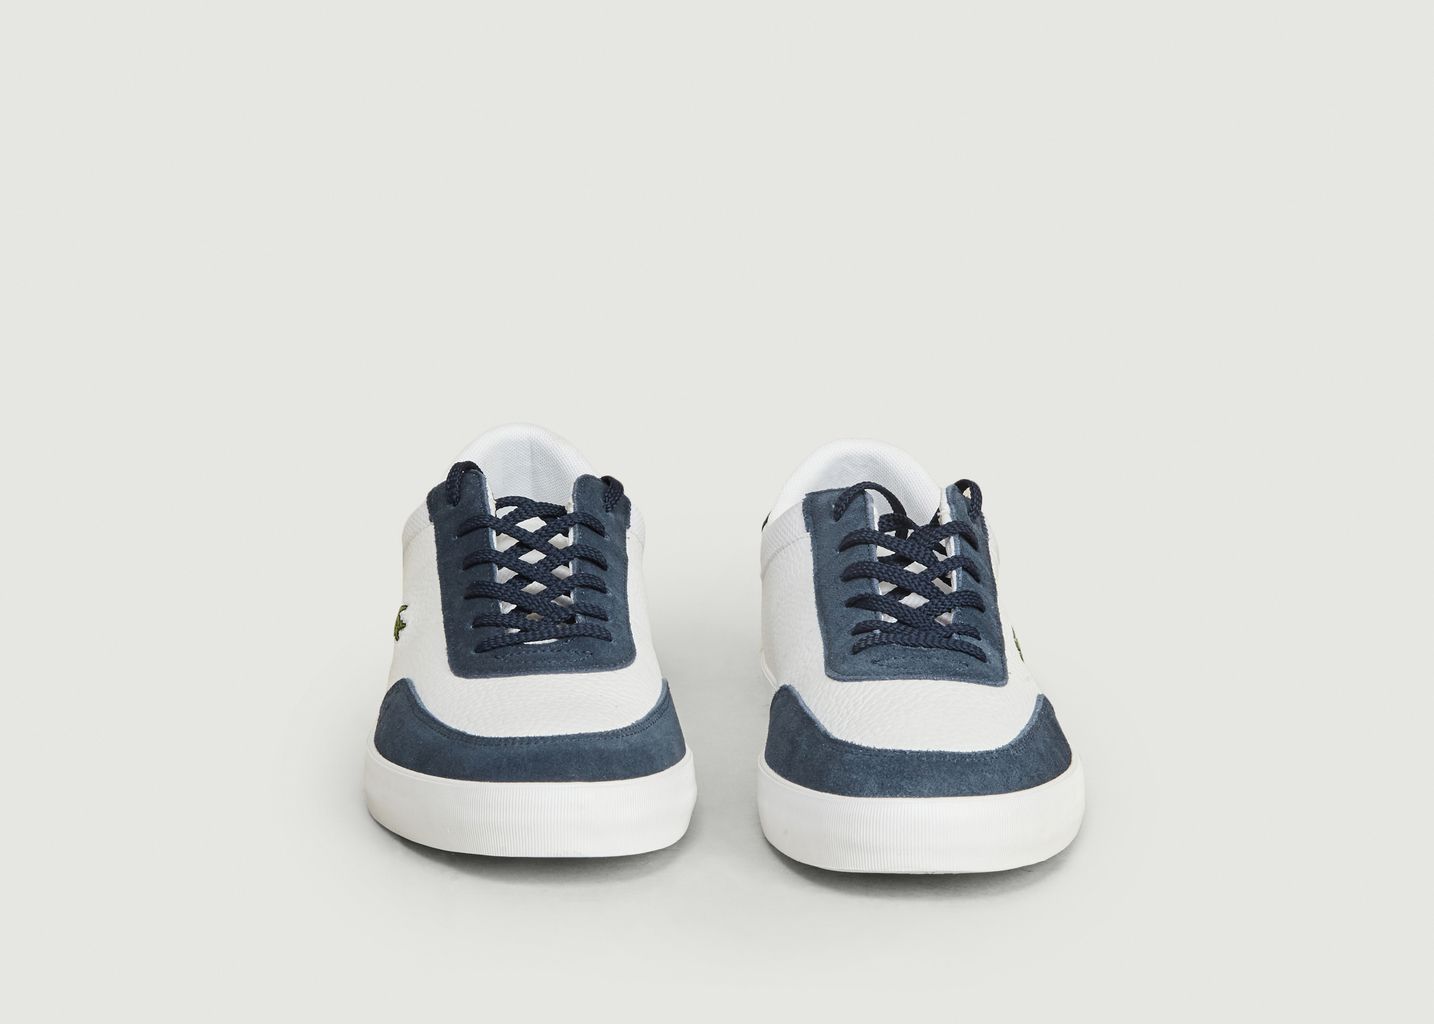 Court-Master leather and synthetic trainers - Lacoste